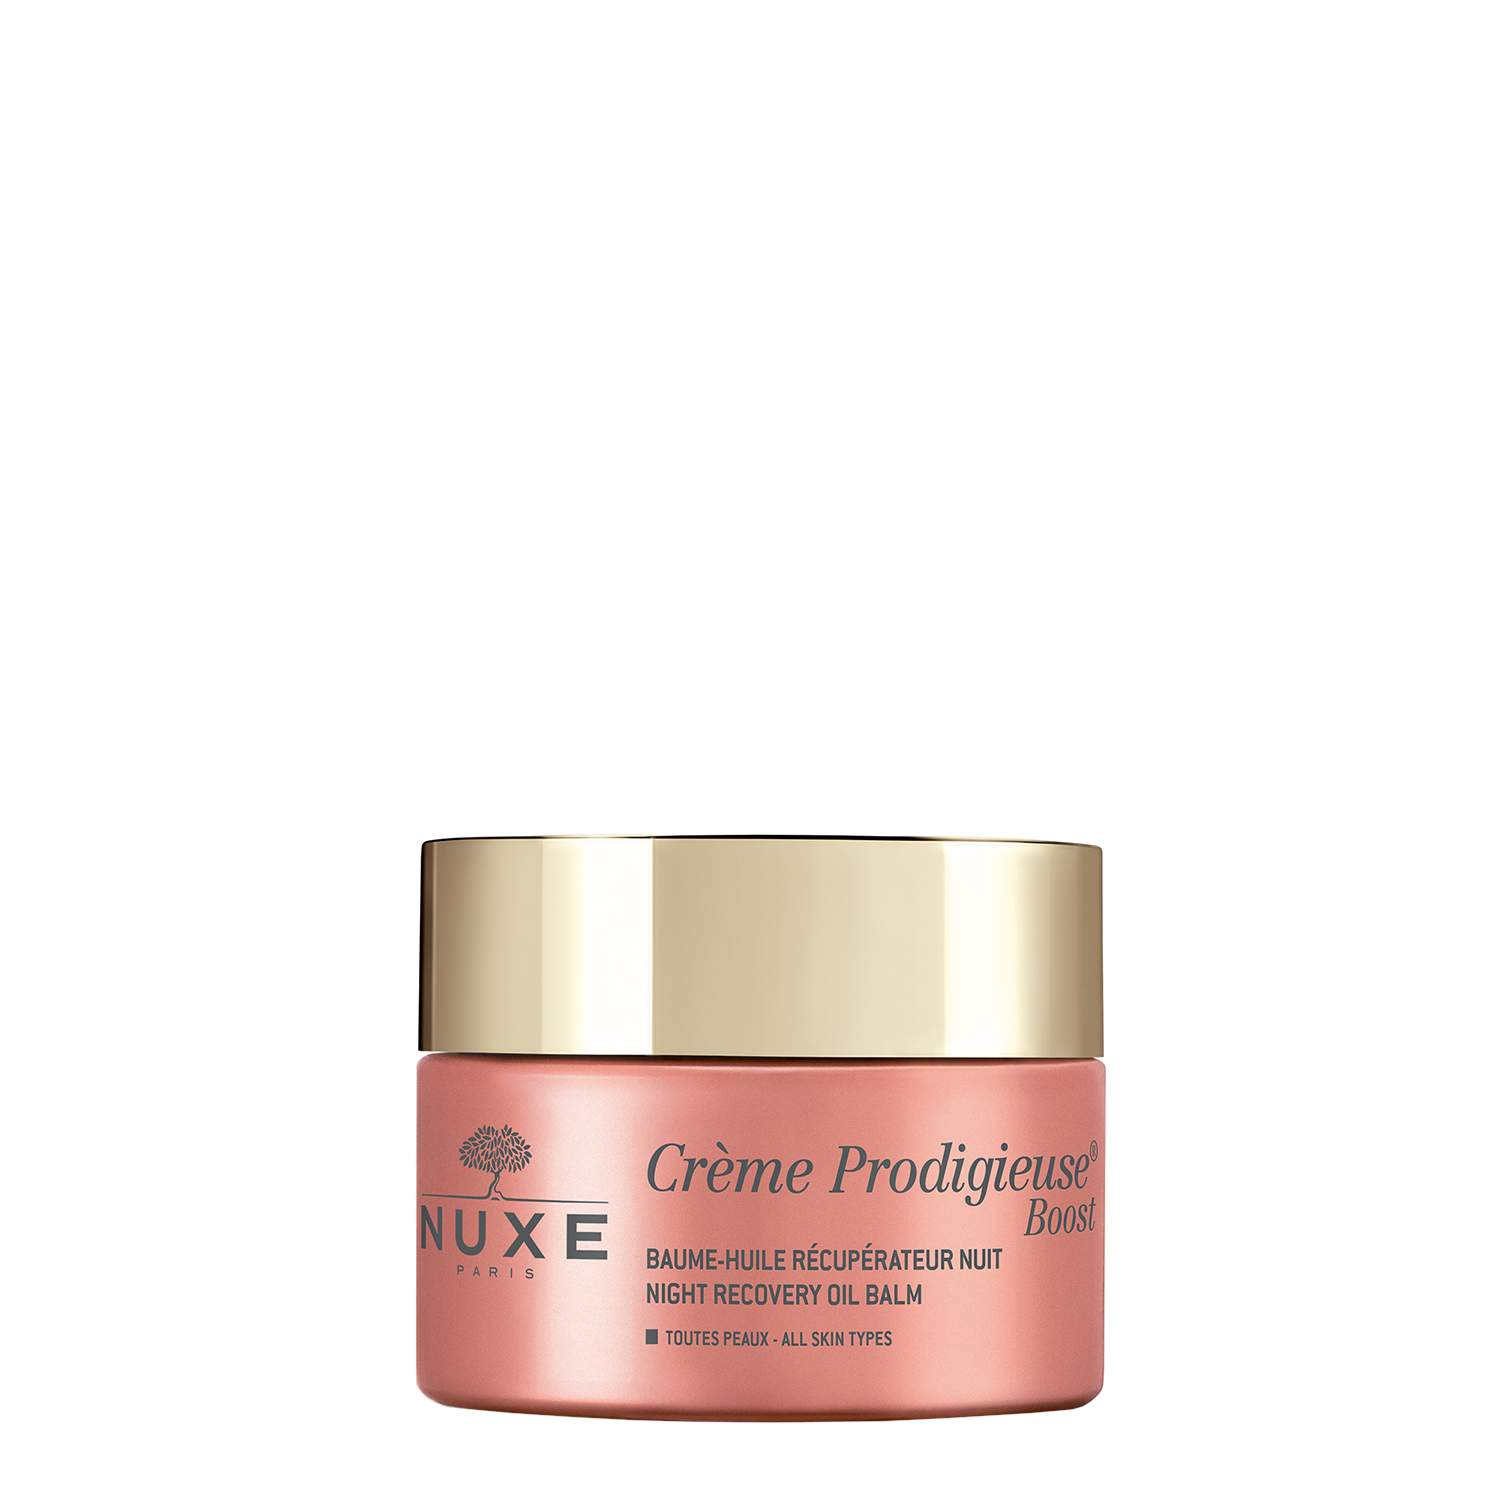 NUXE Crème Prodigieuse® Boost Night Recovery Oil Balm NUXE Crème Prodigieuse® Boost Night Recovery Oil Balm 1